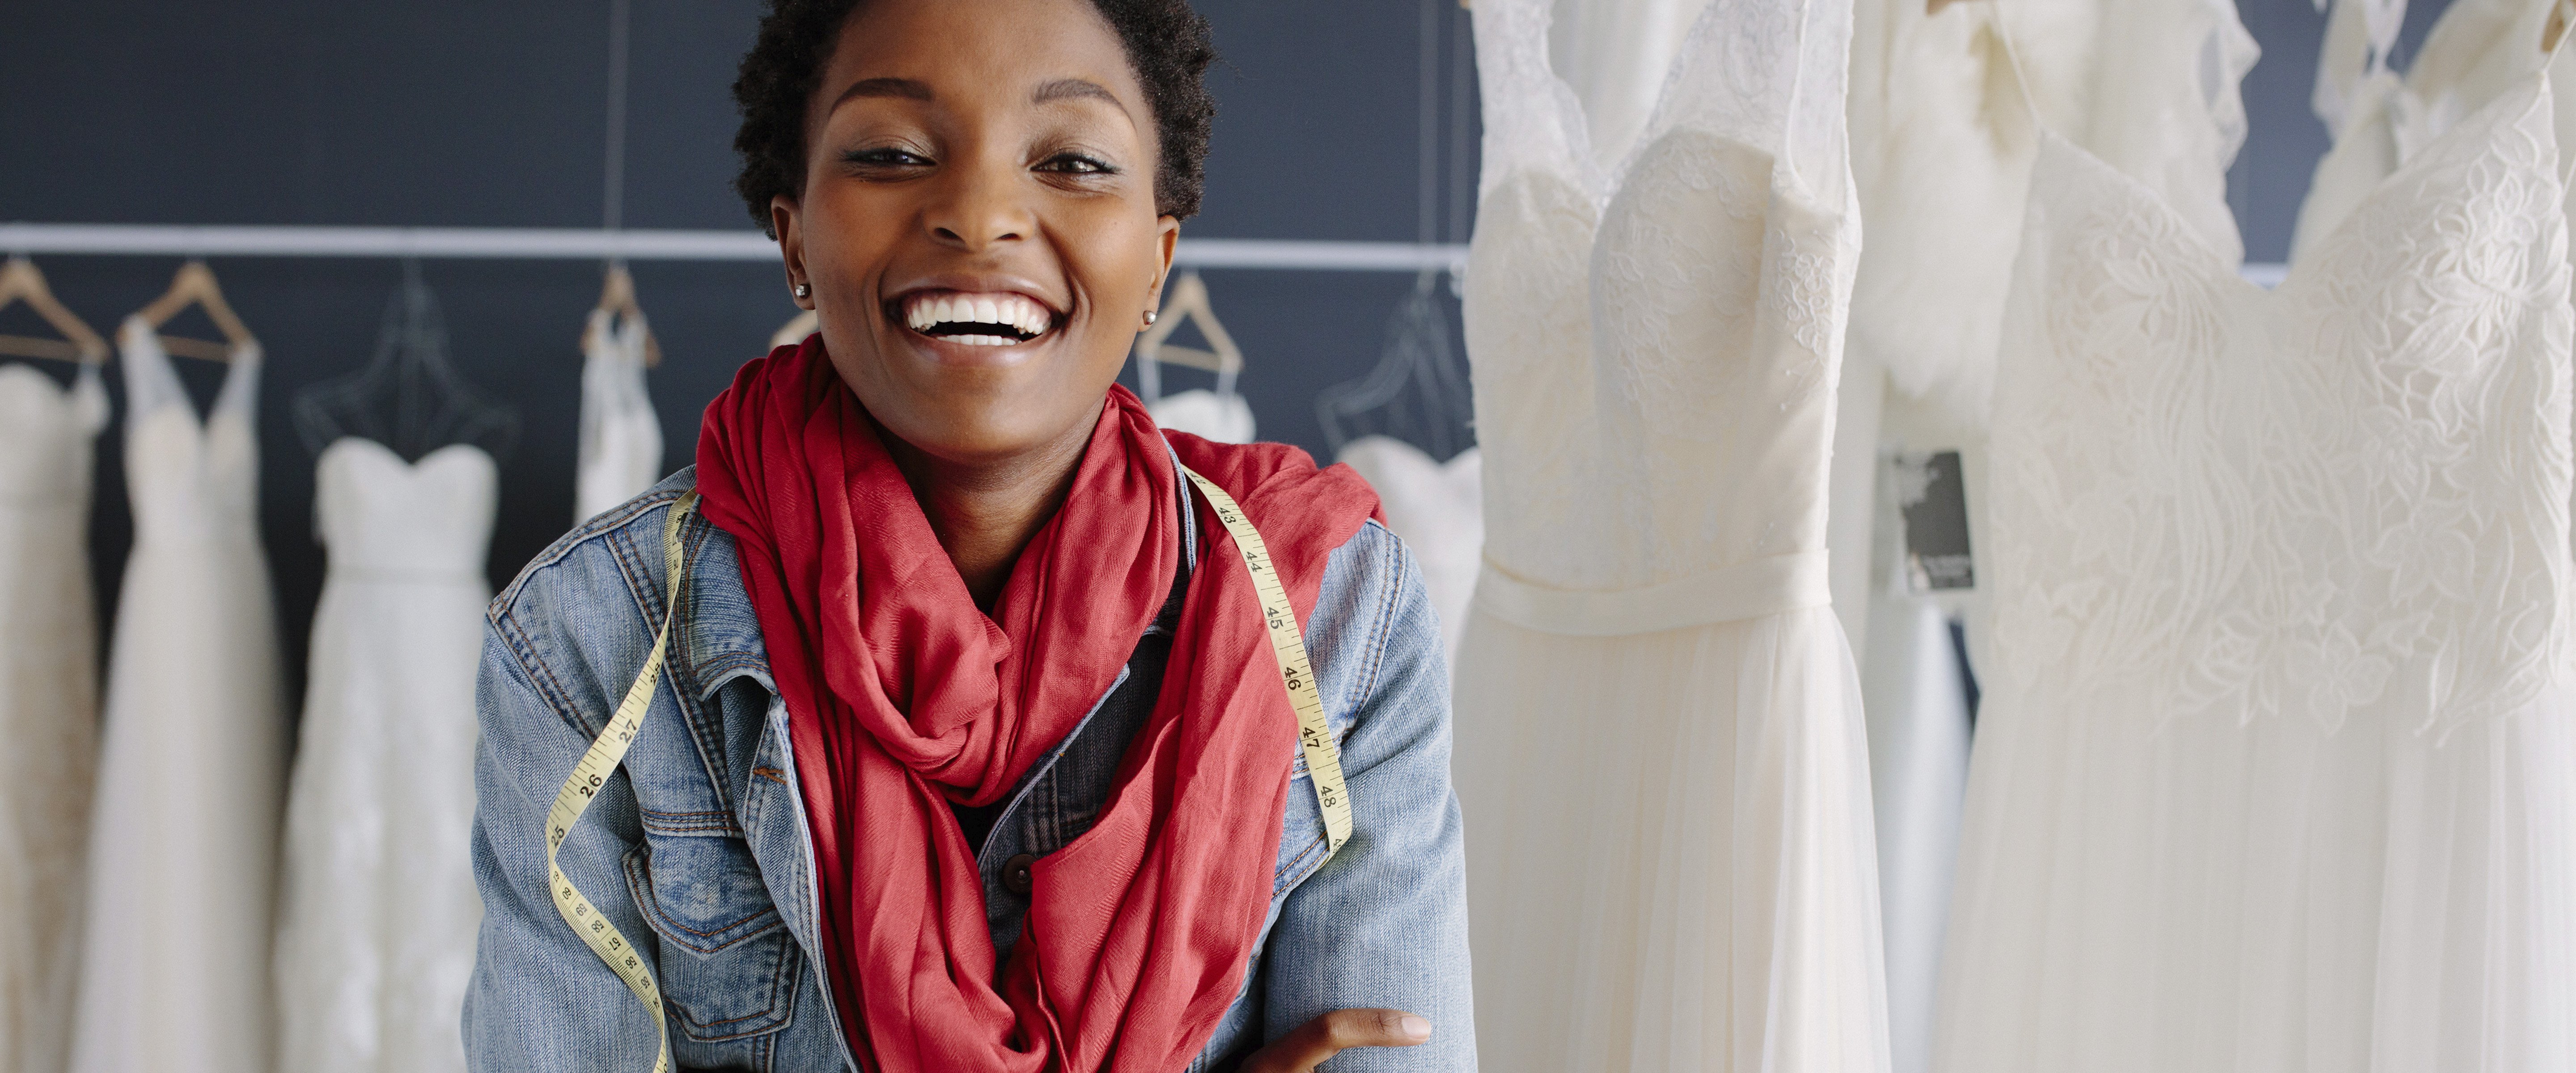 smiling bridal boutique owner next to racks of white dresses